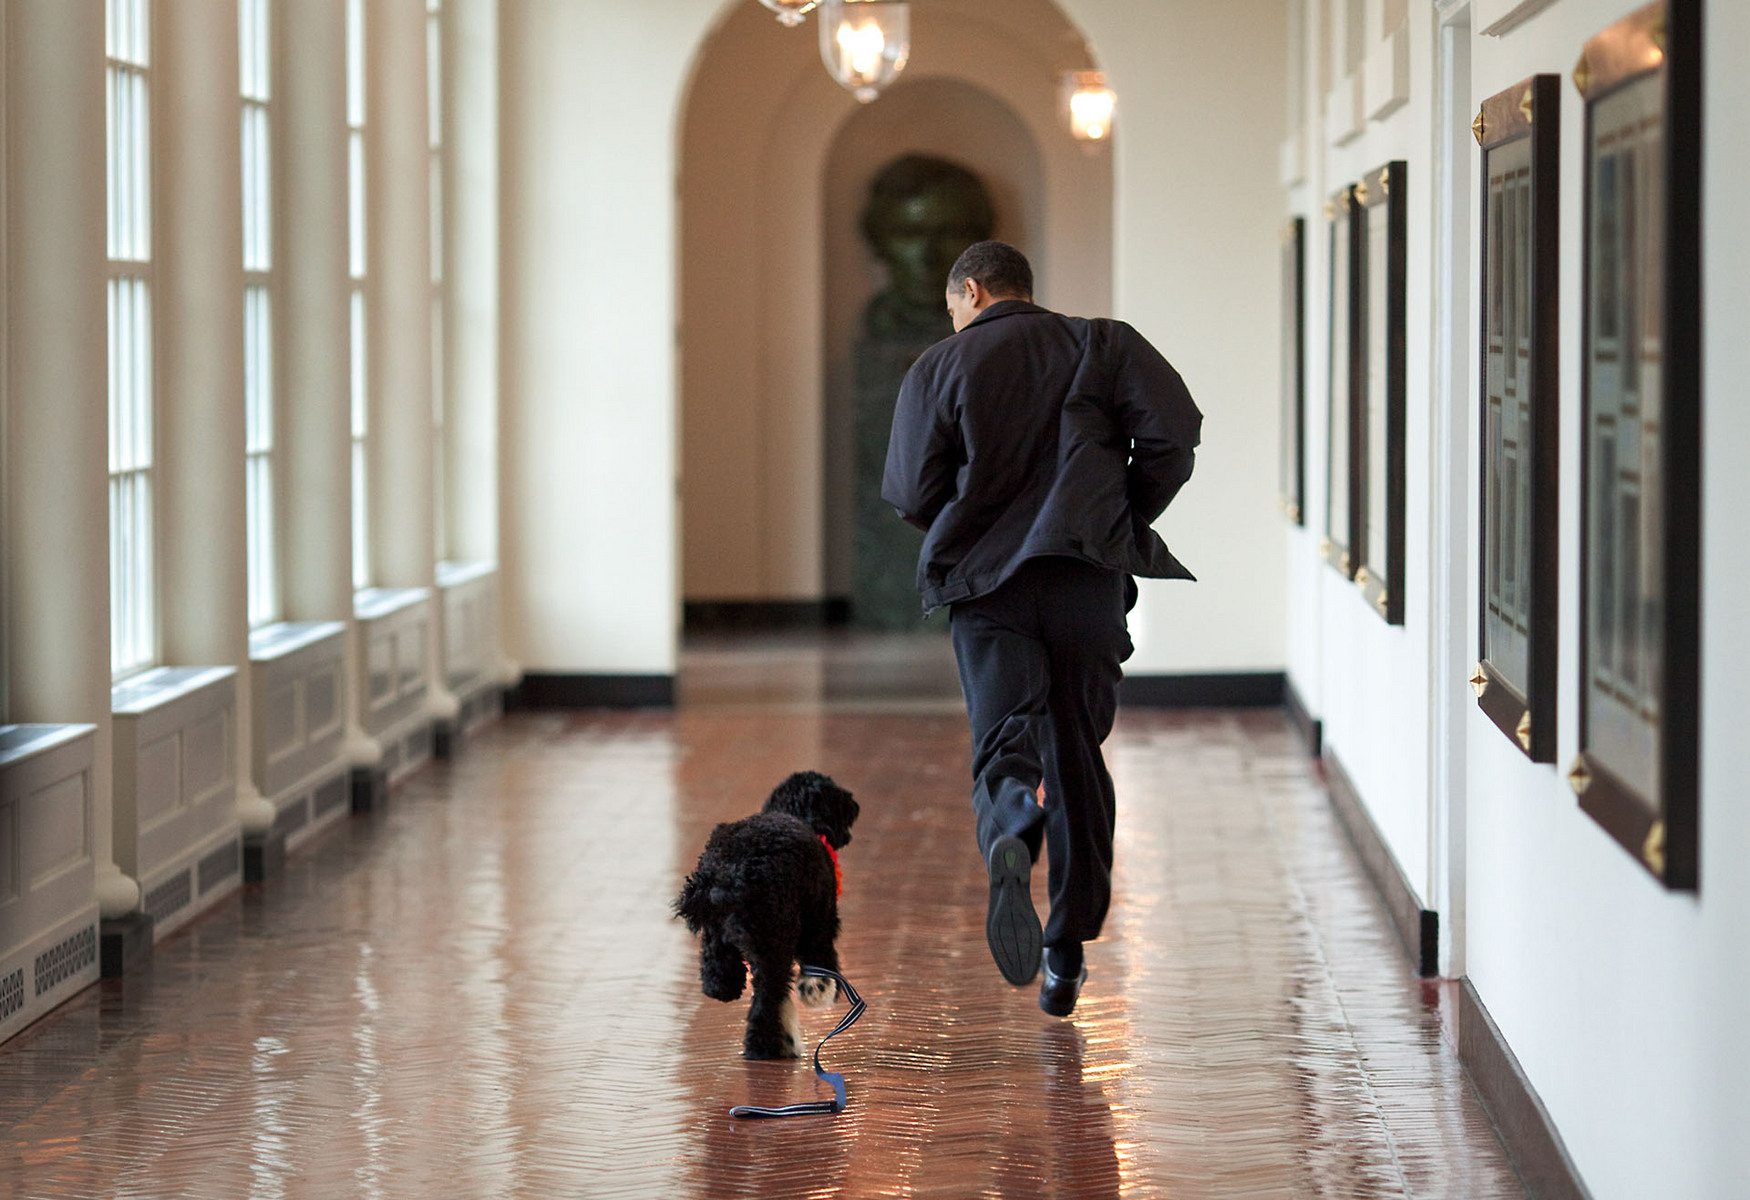  : The First 100 Days : Pete Souza Photography